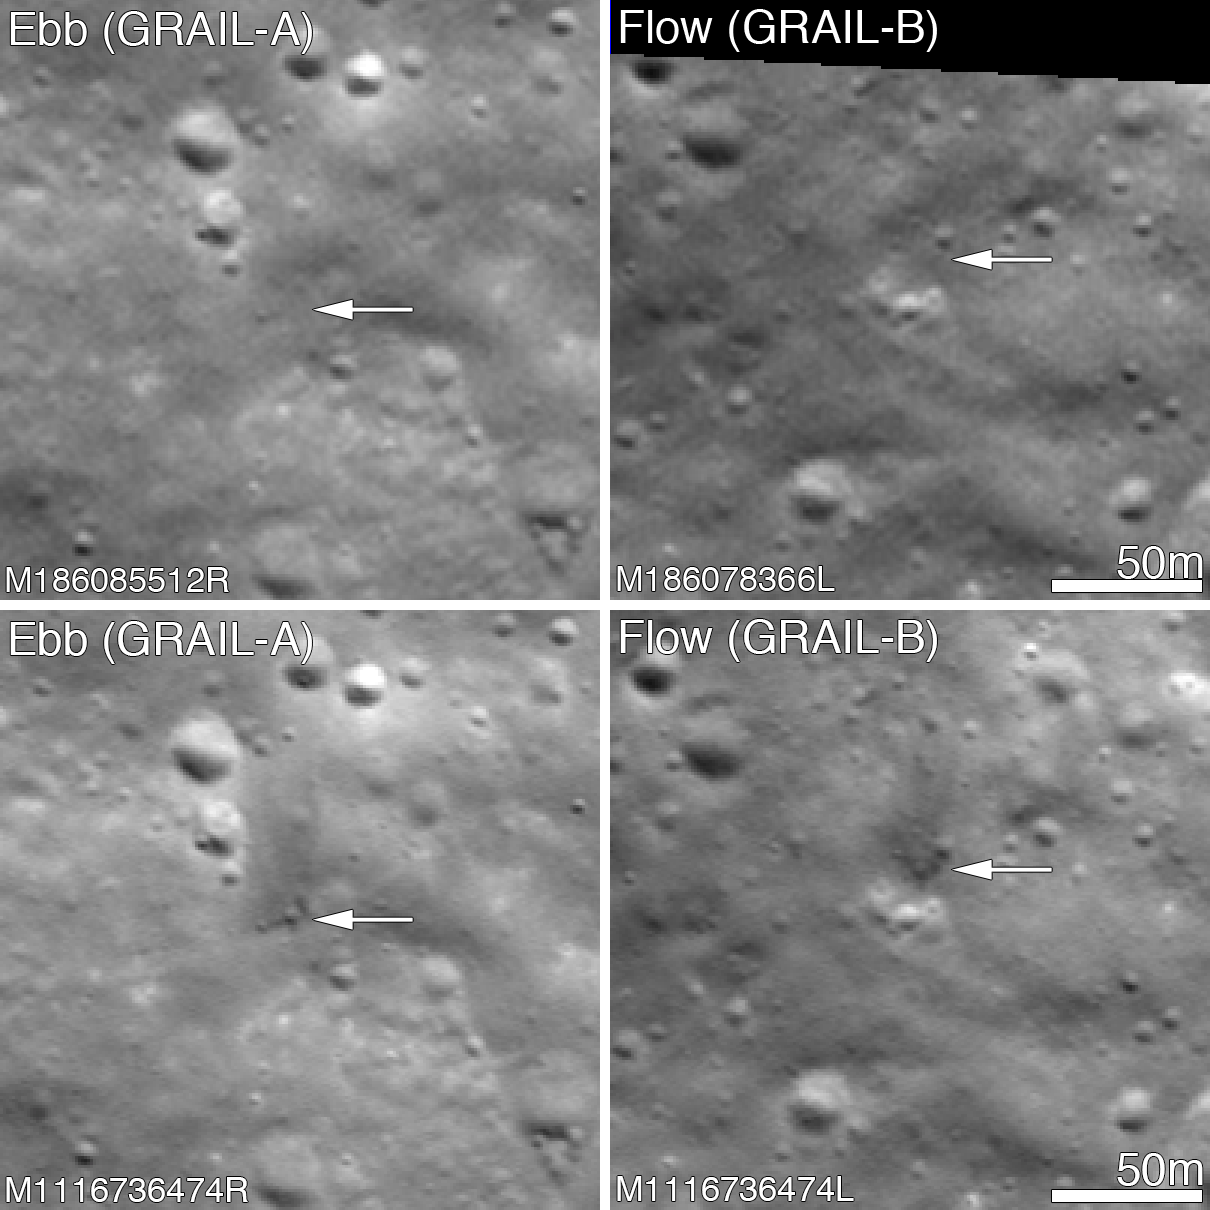 Collection of images showing impact marks of two spacecraft that impacted the moon.